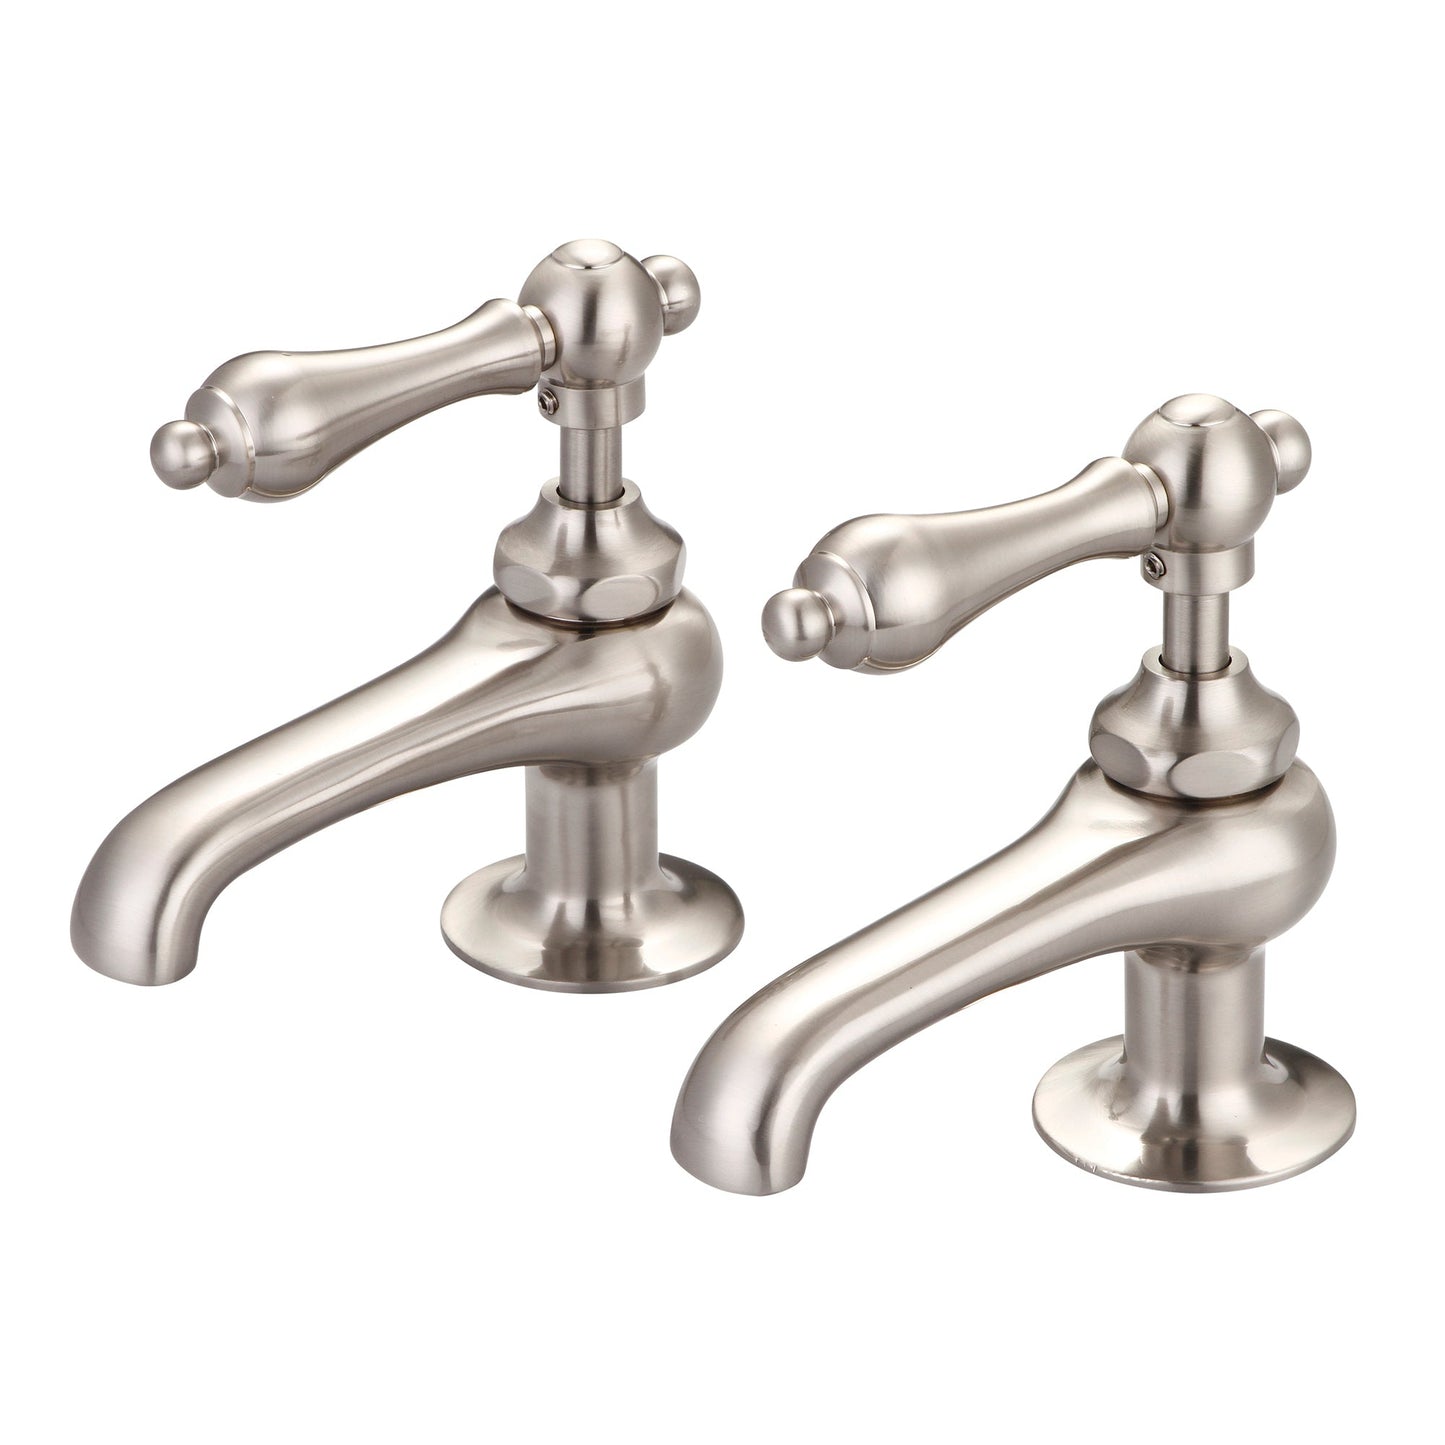 Water Creation Vintage Classic Basin Cocks Lavatory F1-0003 1.88" Grey Solid Brass Faucet With Metal Lever Handles Without Labels